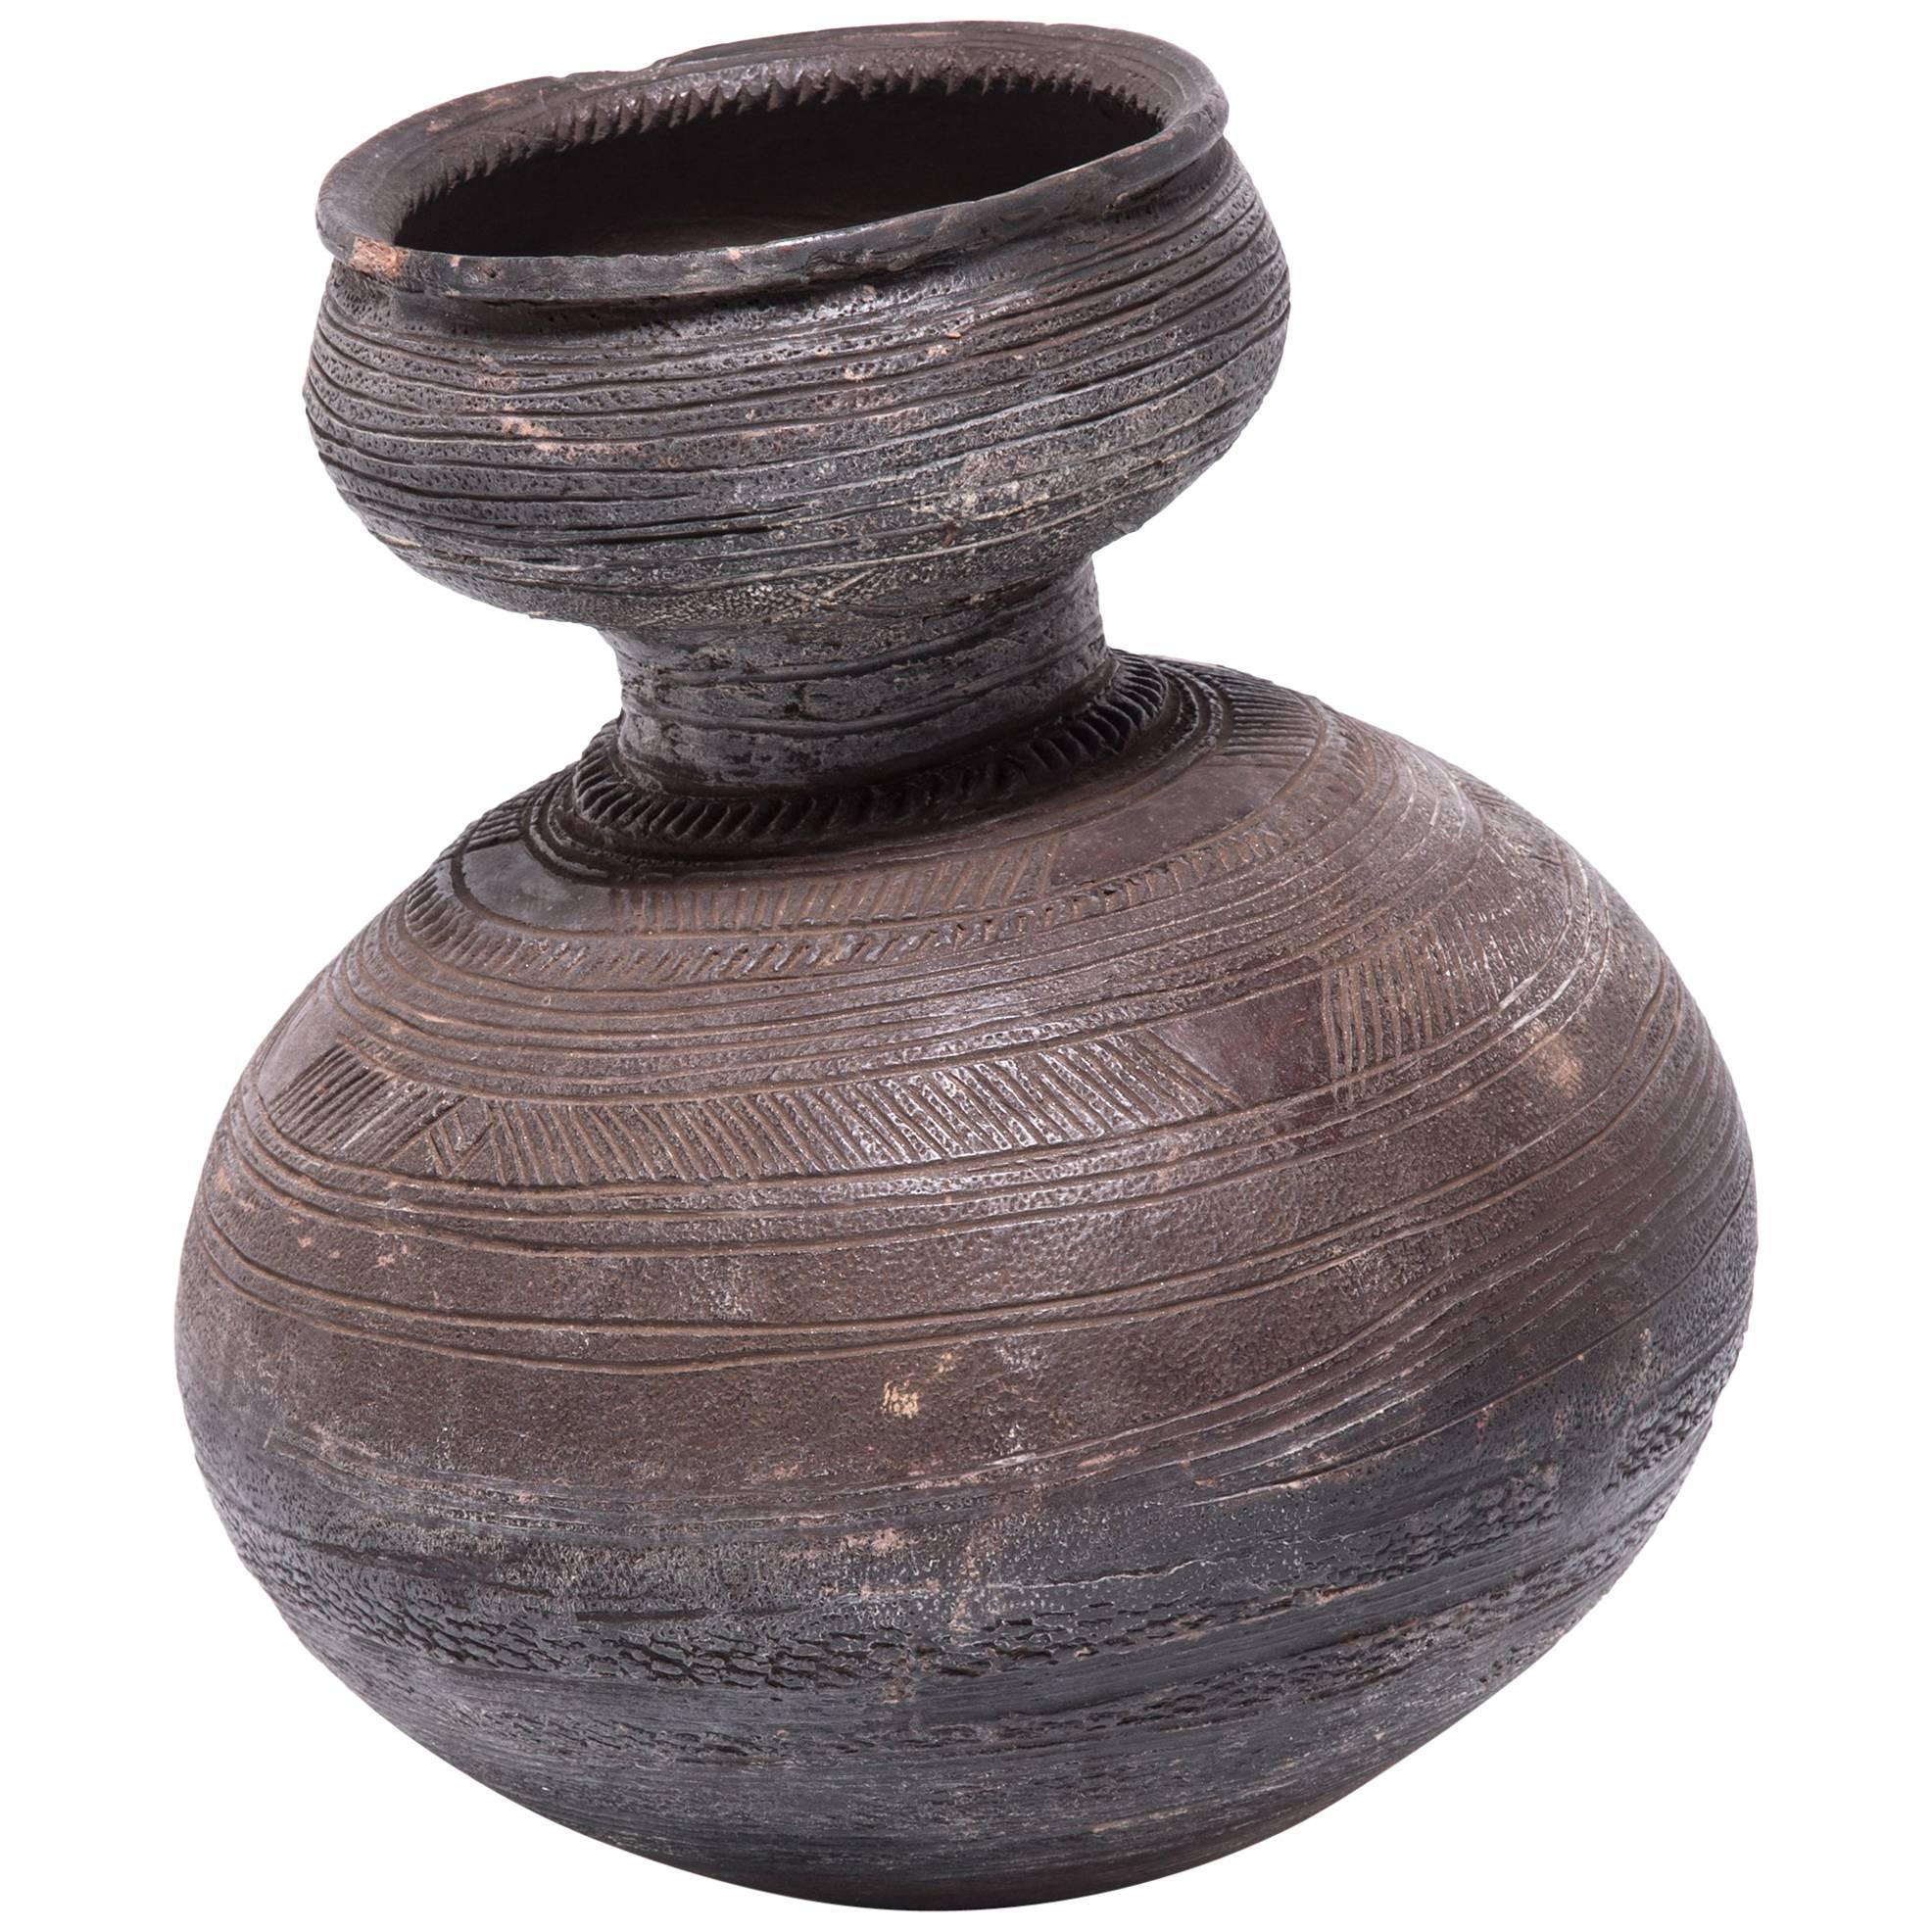 Nupe Gourd Water Vessel, c. 1900